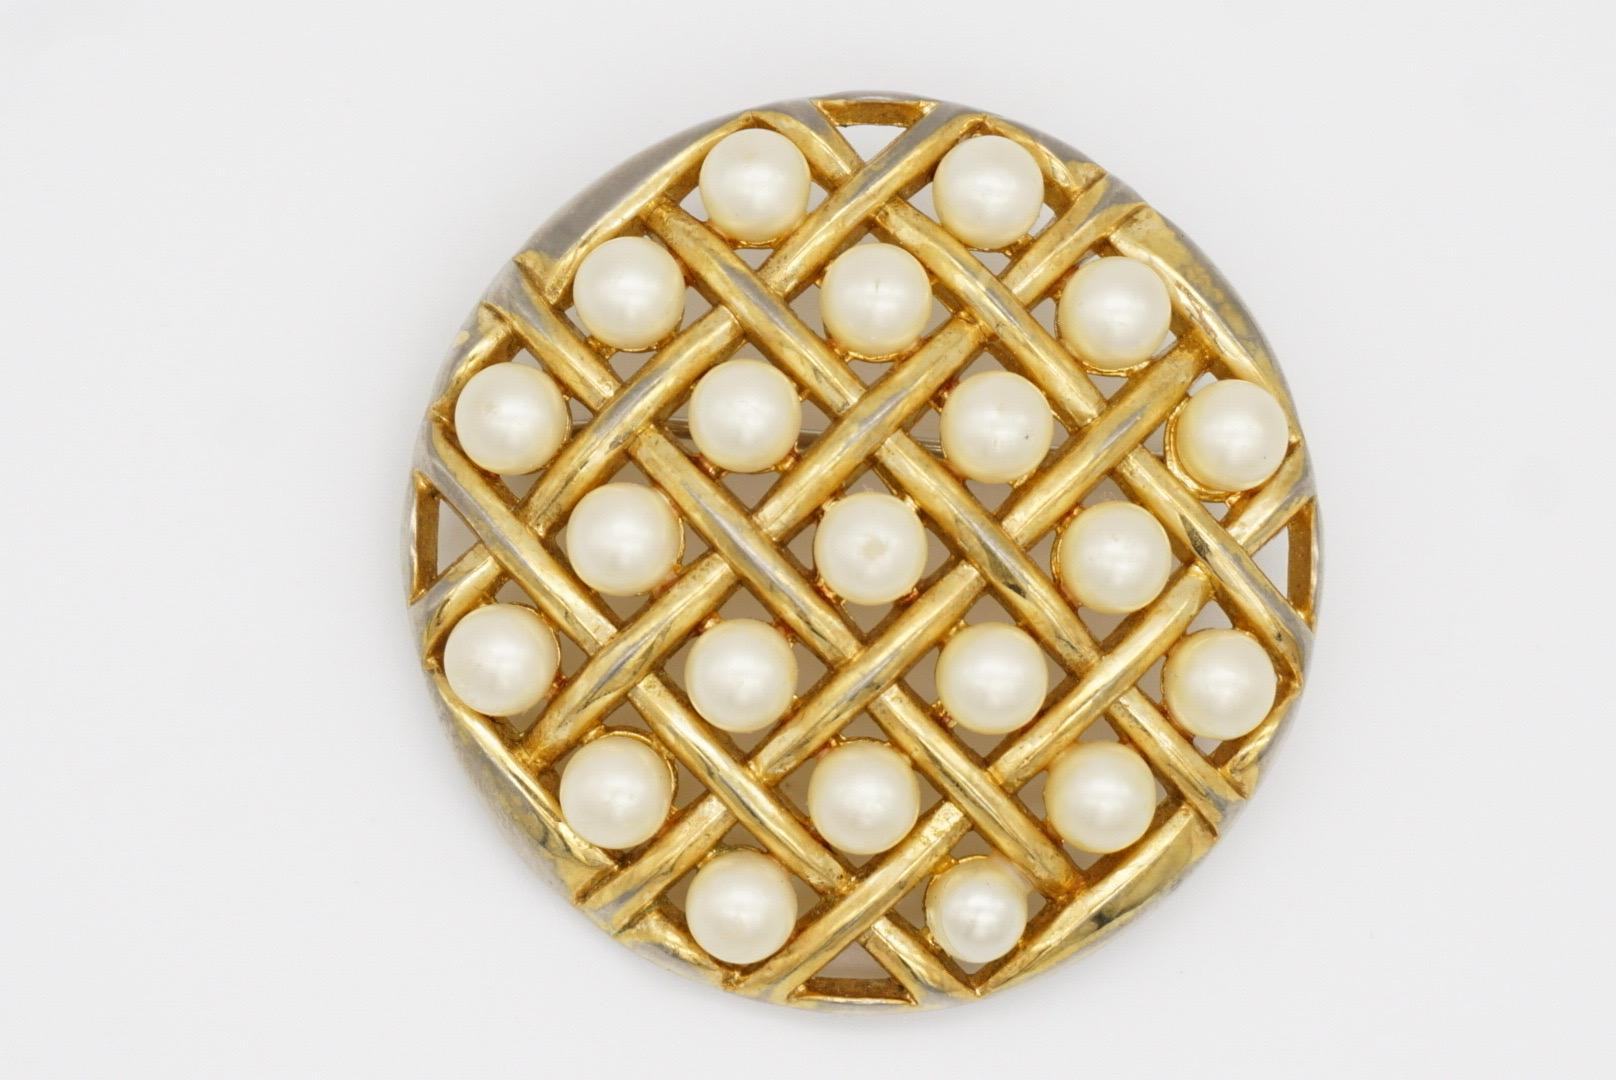 Crown Trifari 1950s Round Circle White Pearls Openwork Criss Cross Chunky Brooch, Gold Tone

Good condition, 100% genuine. Only light colour loss, still beautiful and good to wear. 

A very beautiful brooch, signed at the back.

Size: 5.5*5.5